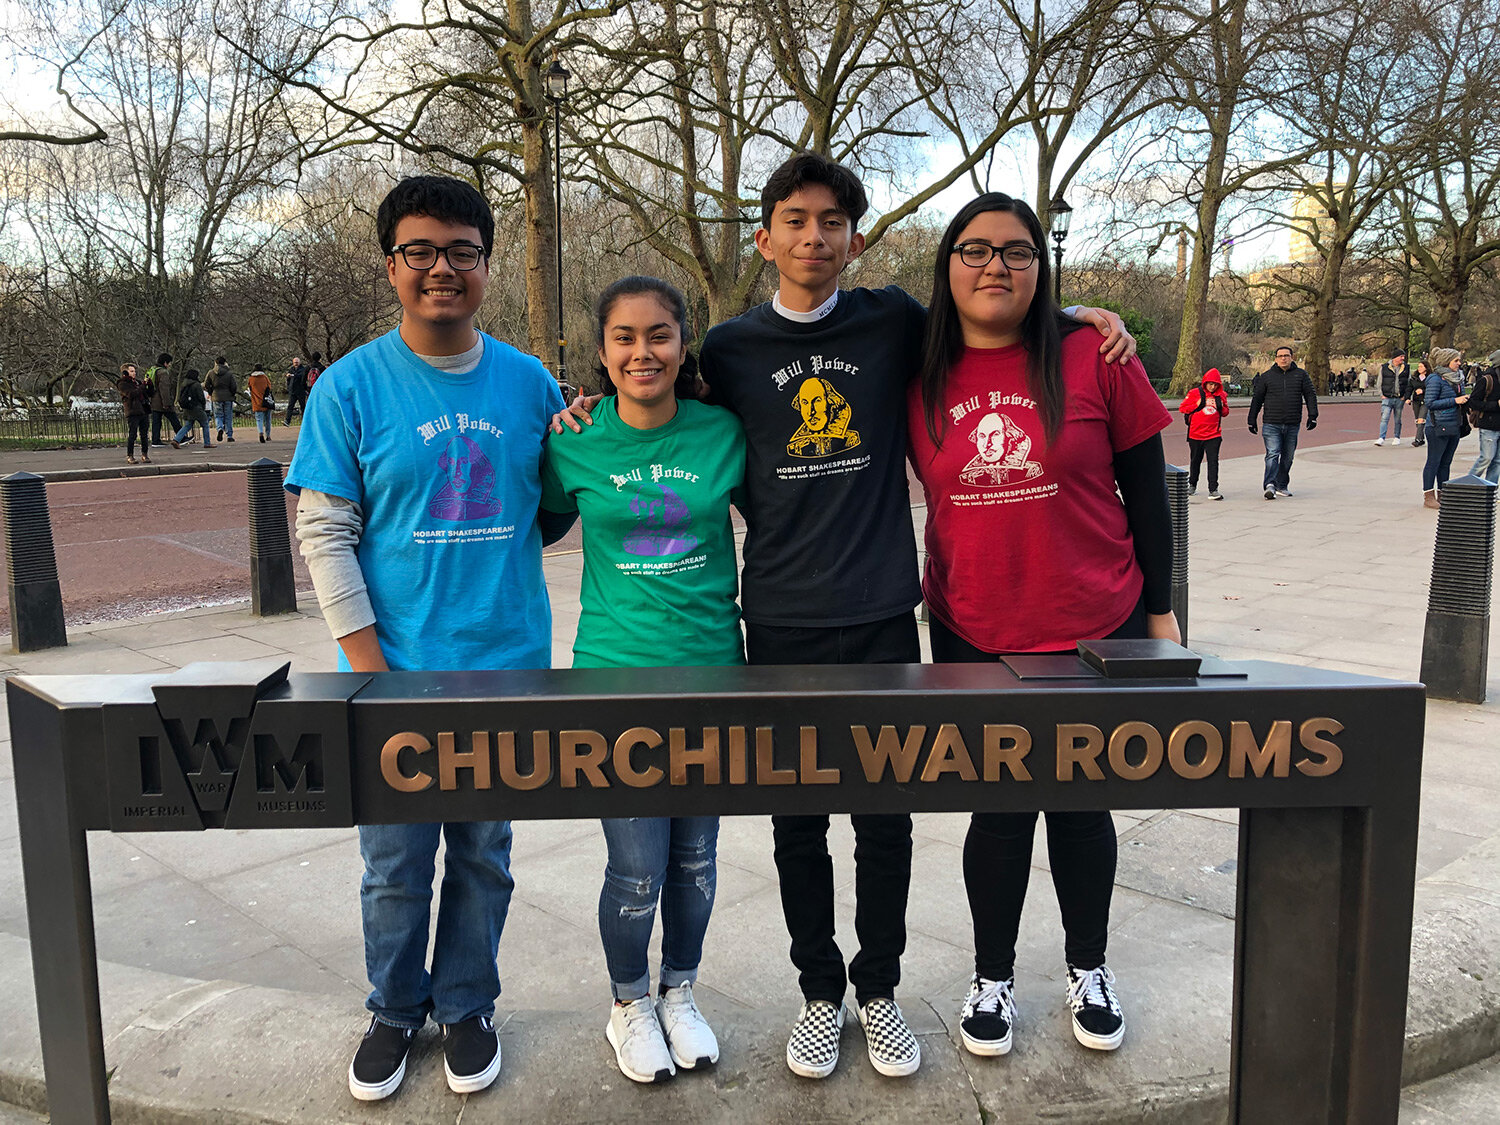  Going Underground to see The Churchill War Rooms 